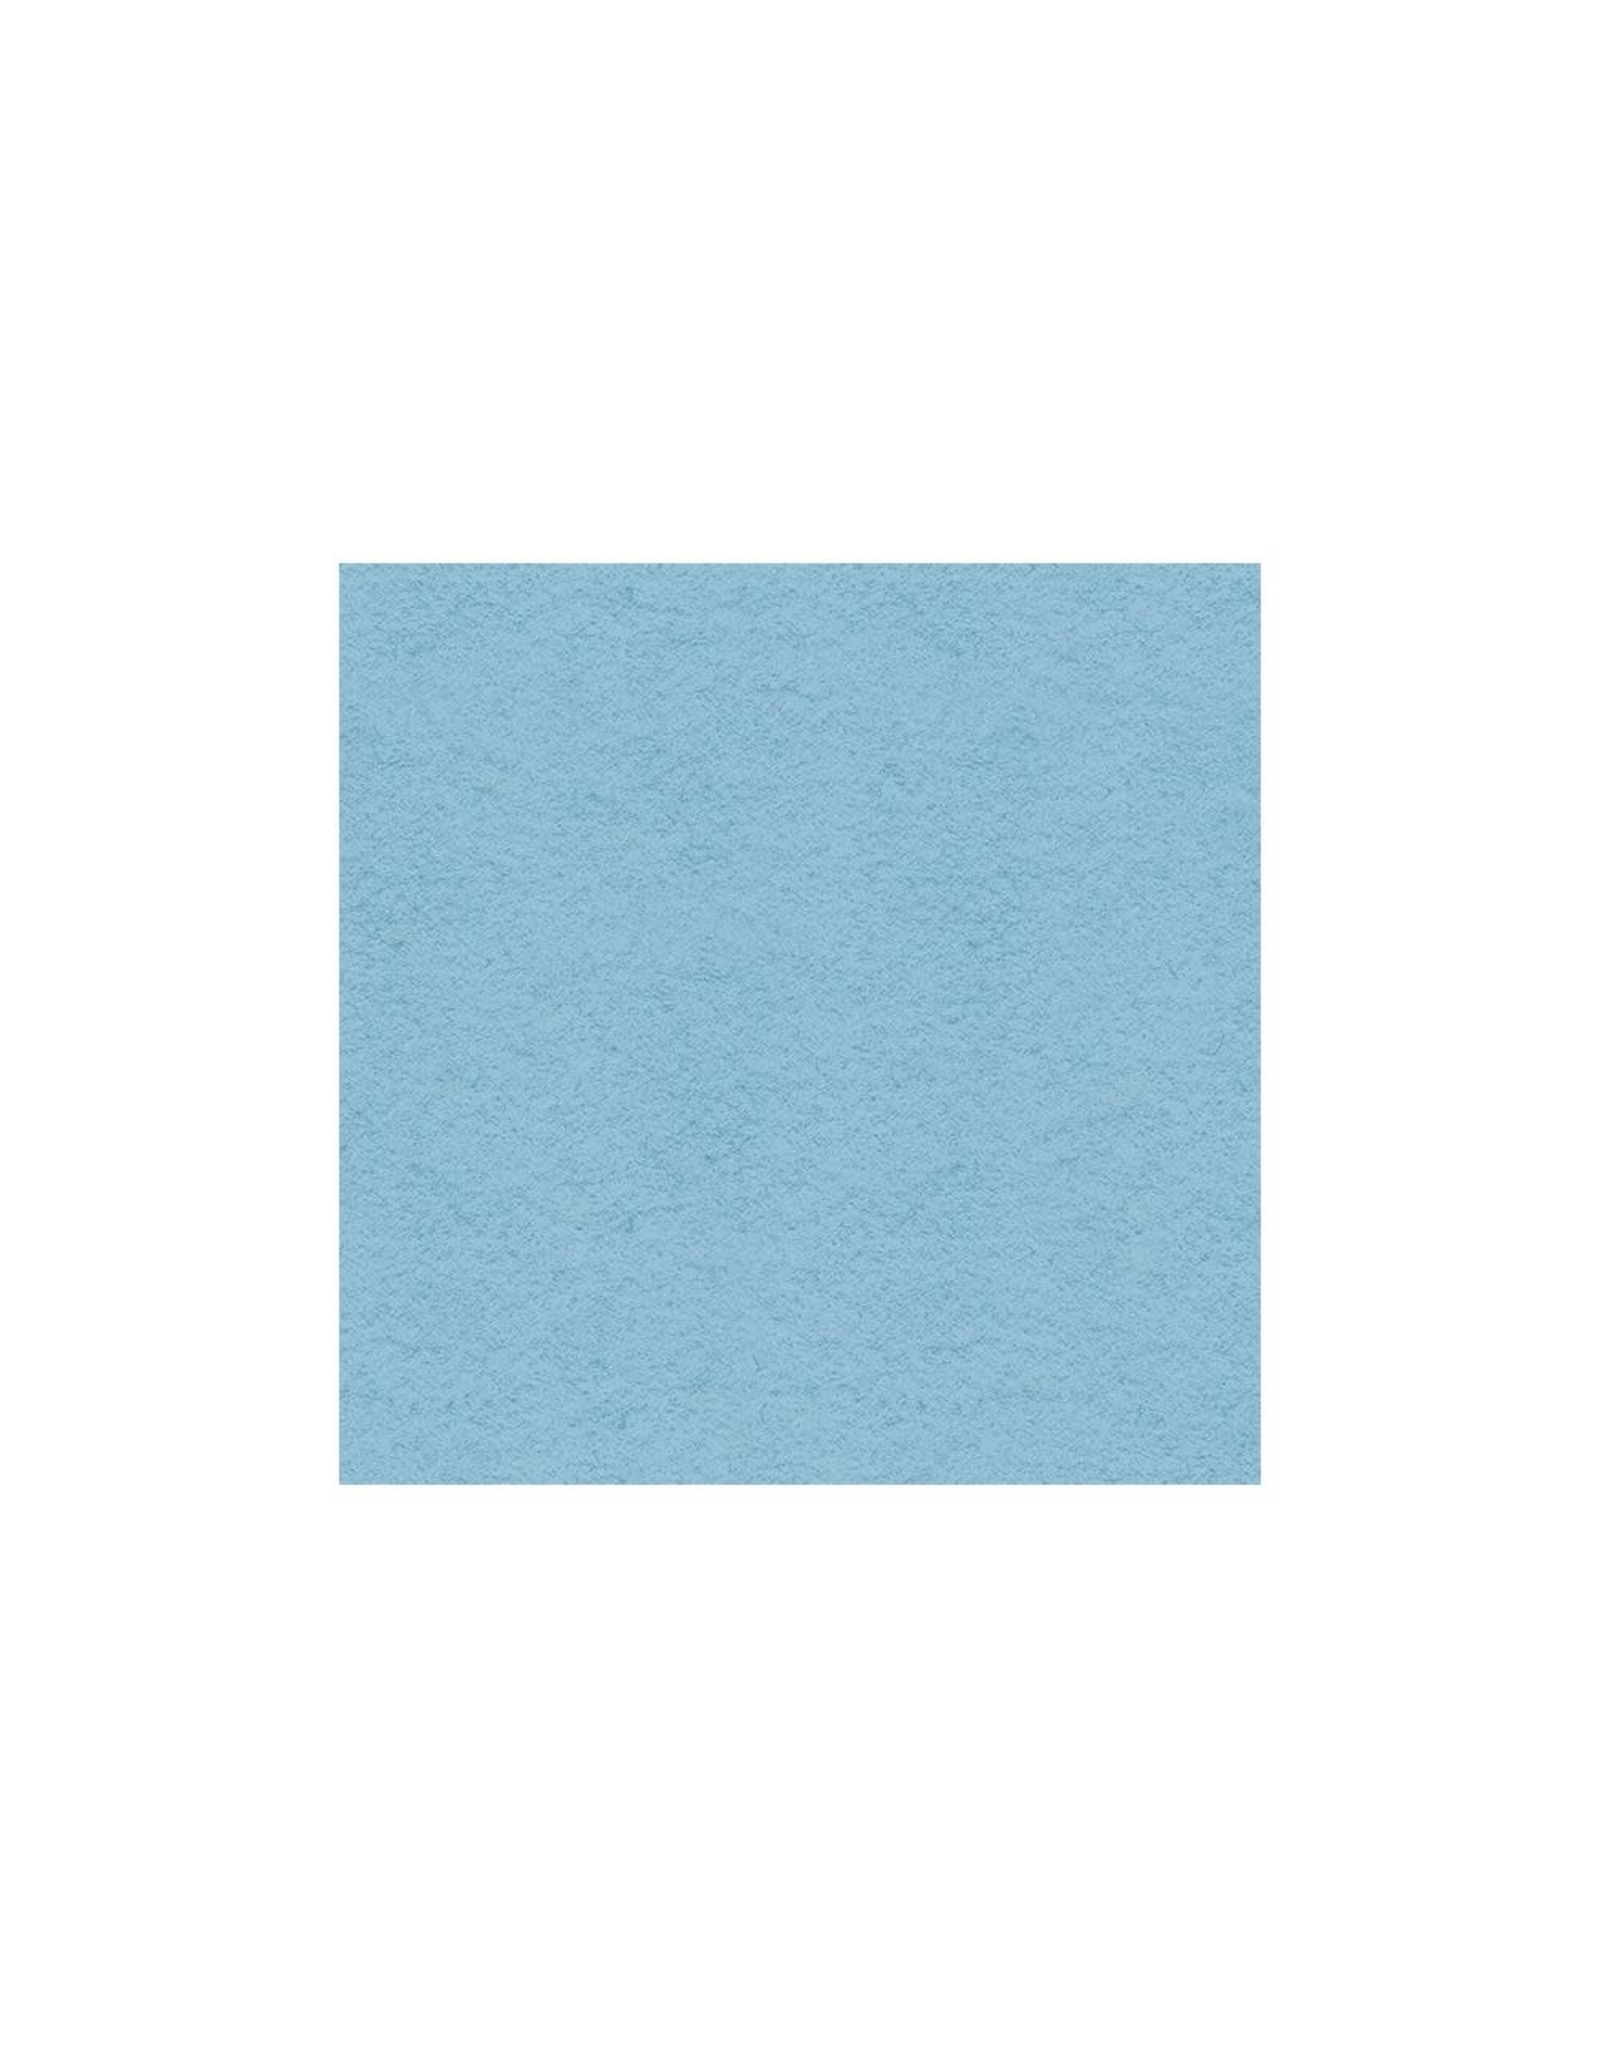 MY COLORS MY COLORS 100 LB HEAVYWEIGHT MOONSTONE BLUE 12x12 CARDSTOCK